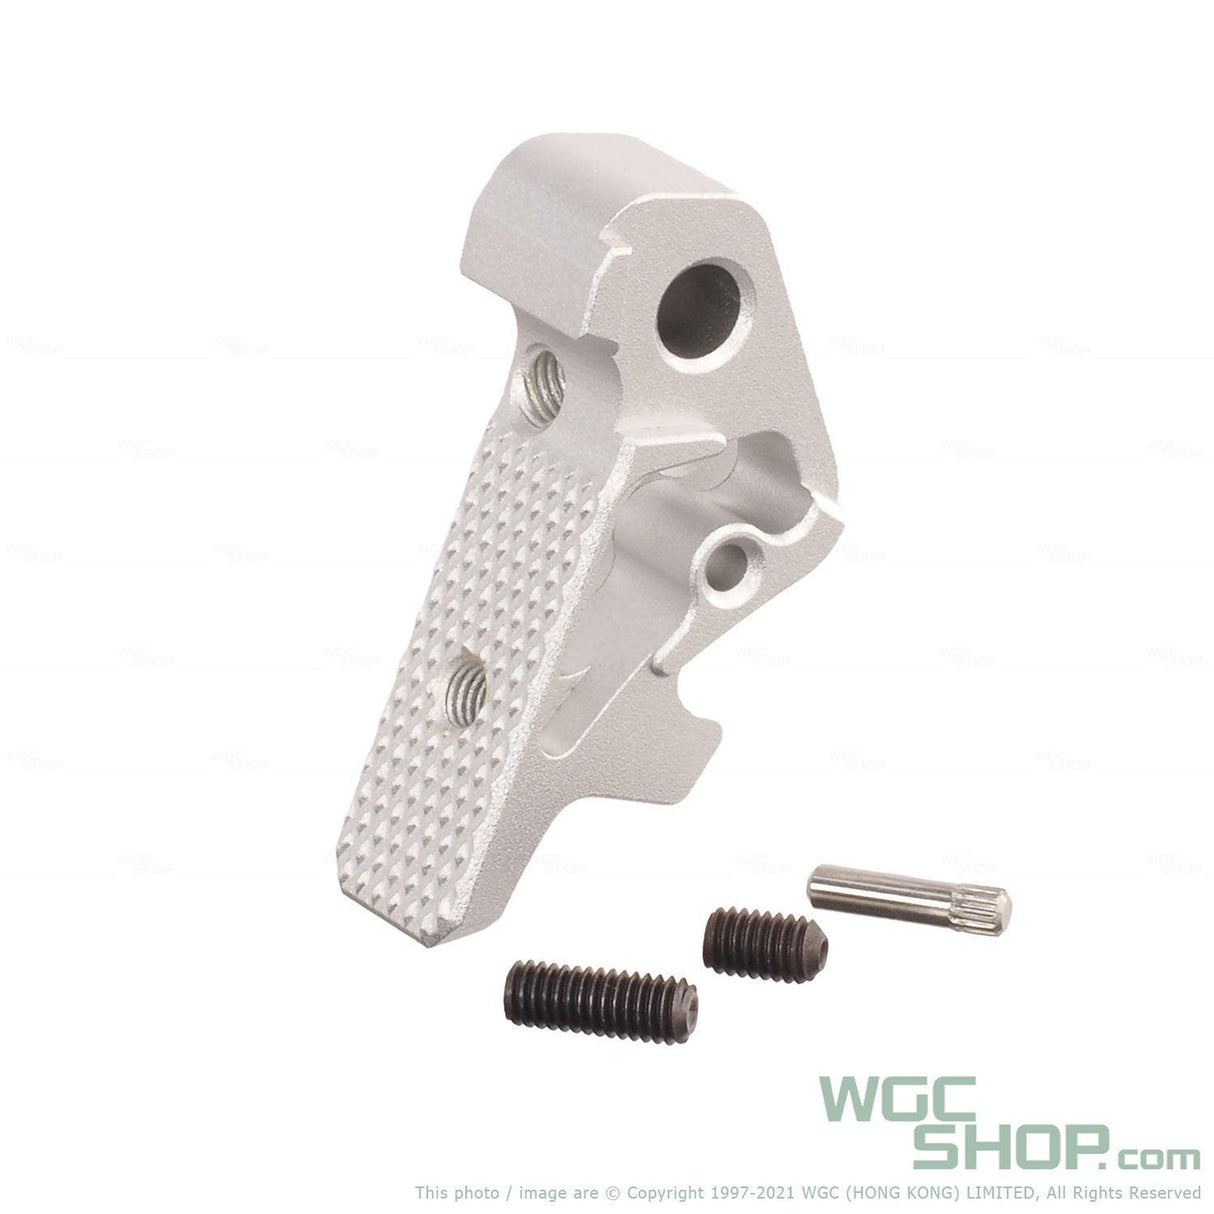 TTI AIRSOFT VICTOR Tactical Trigger for AAP01 / TP22 / Glock GBB Airsoft - WGC Shop